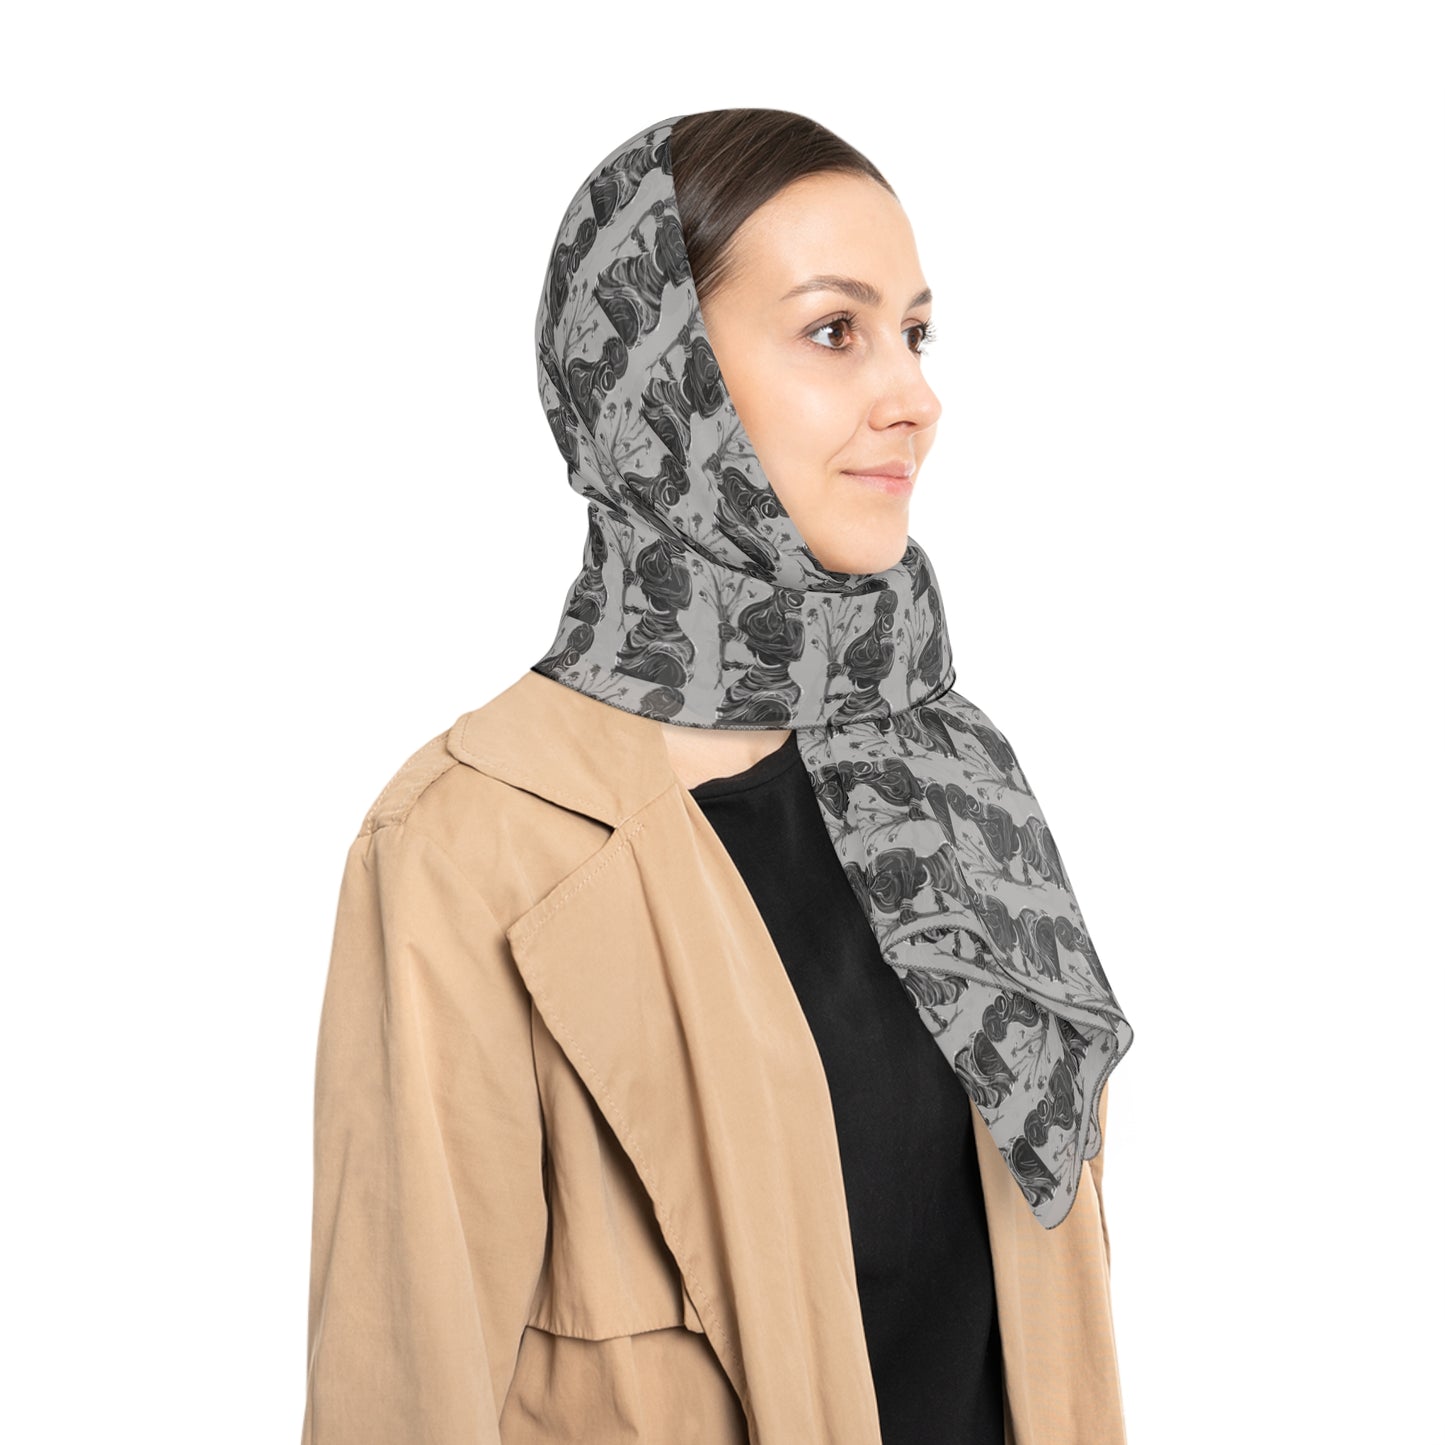 Reale Women ...Buy Themselves Flowers (Scarf-Greyscale)